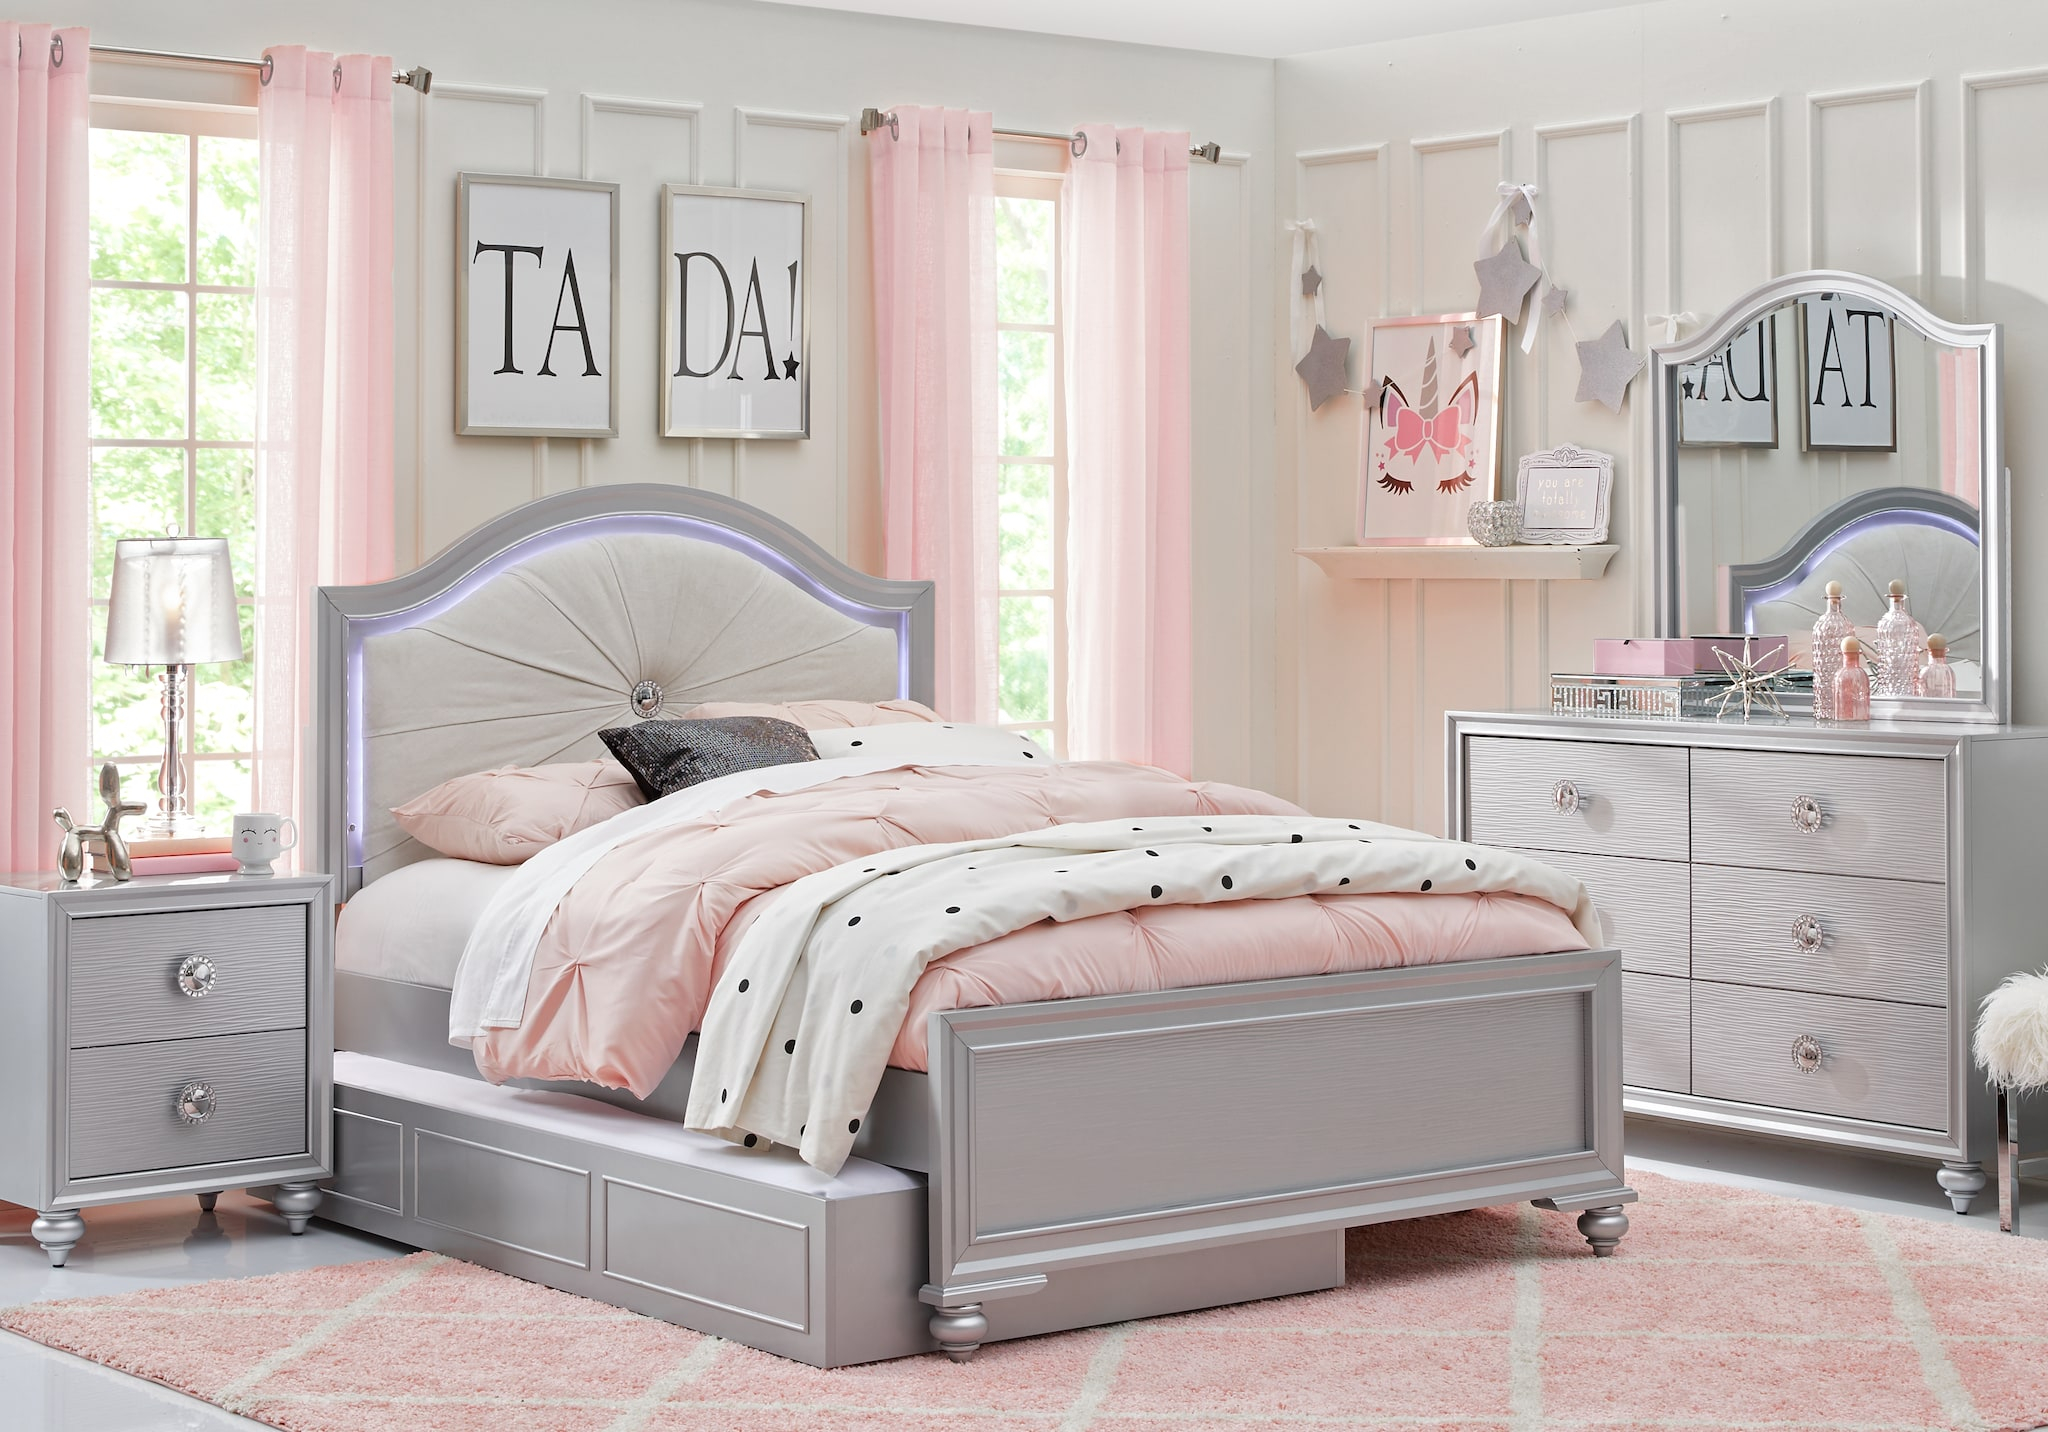 Girls Bedroom Sets Suitable Combine With Bedroom Sets For Girls within measurements 2048 X 1432